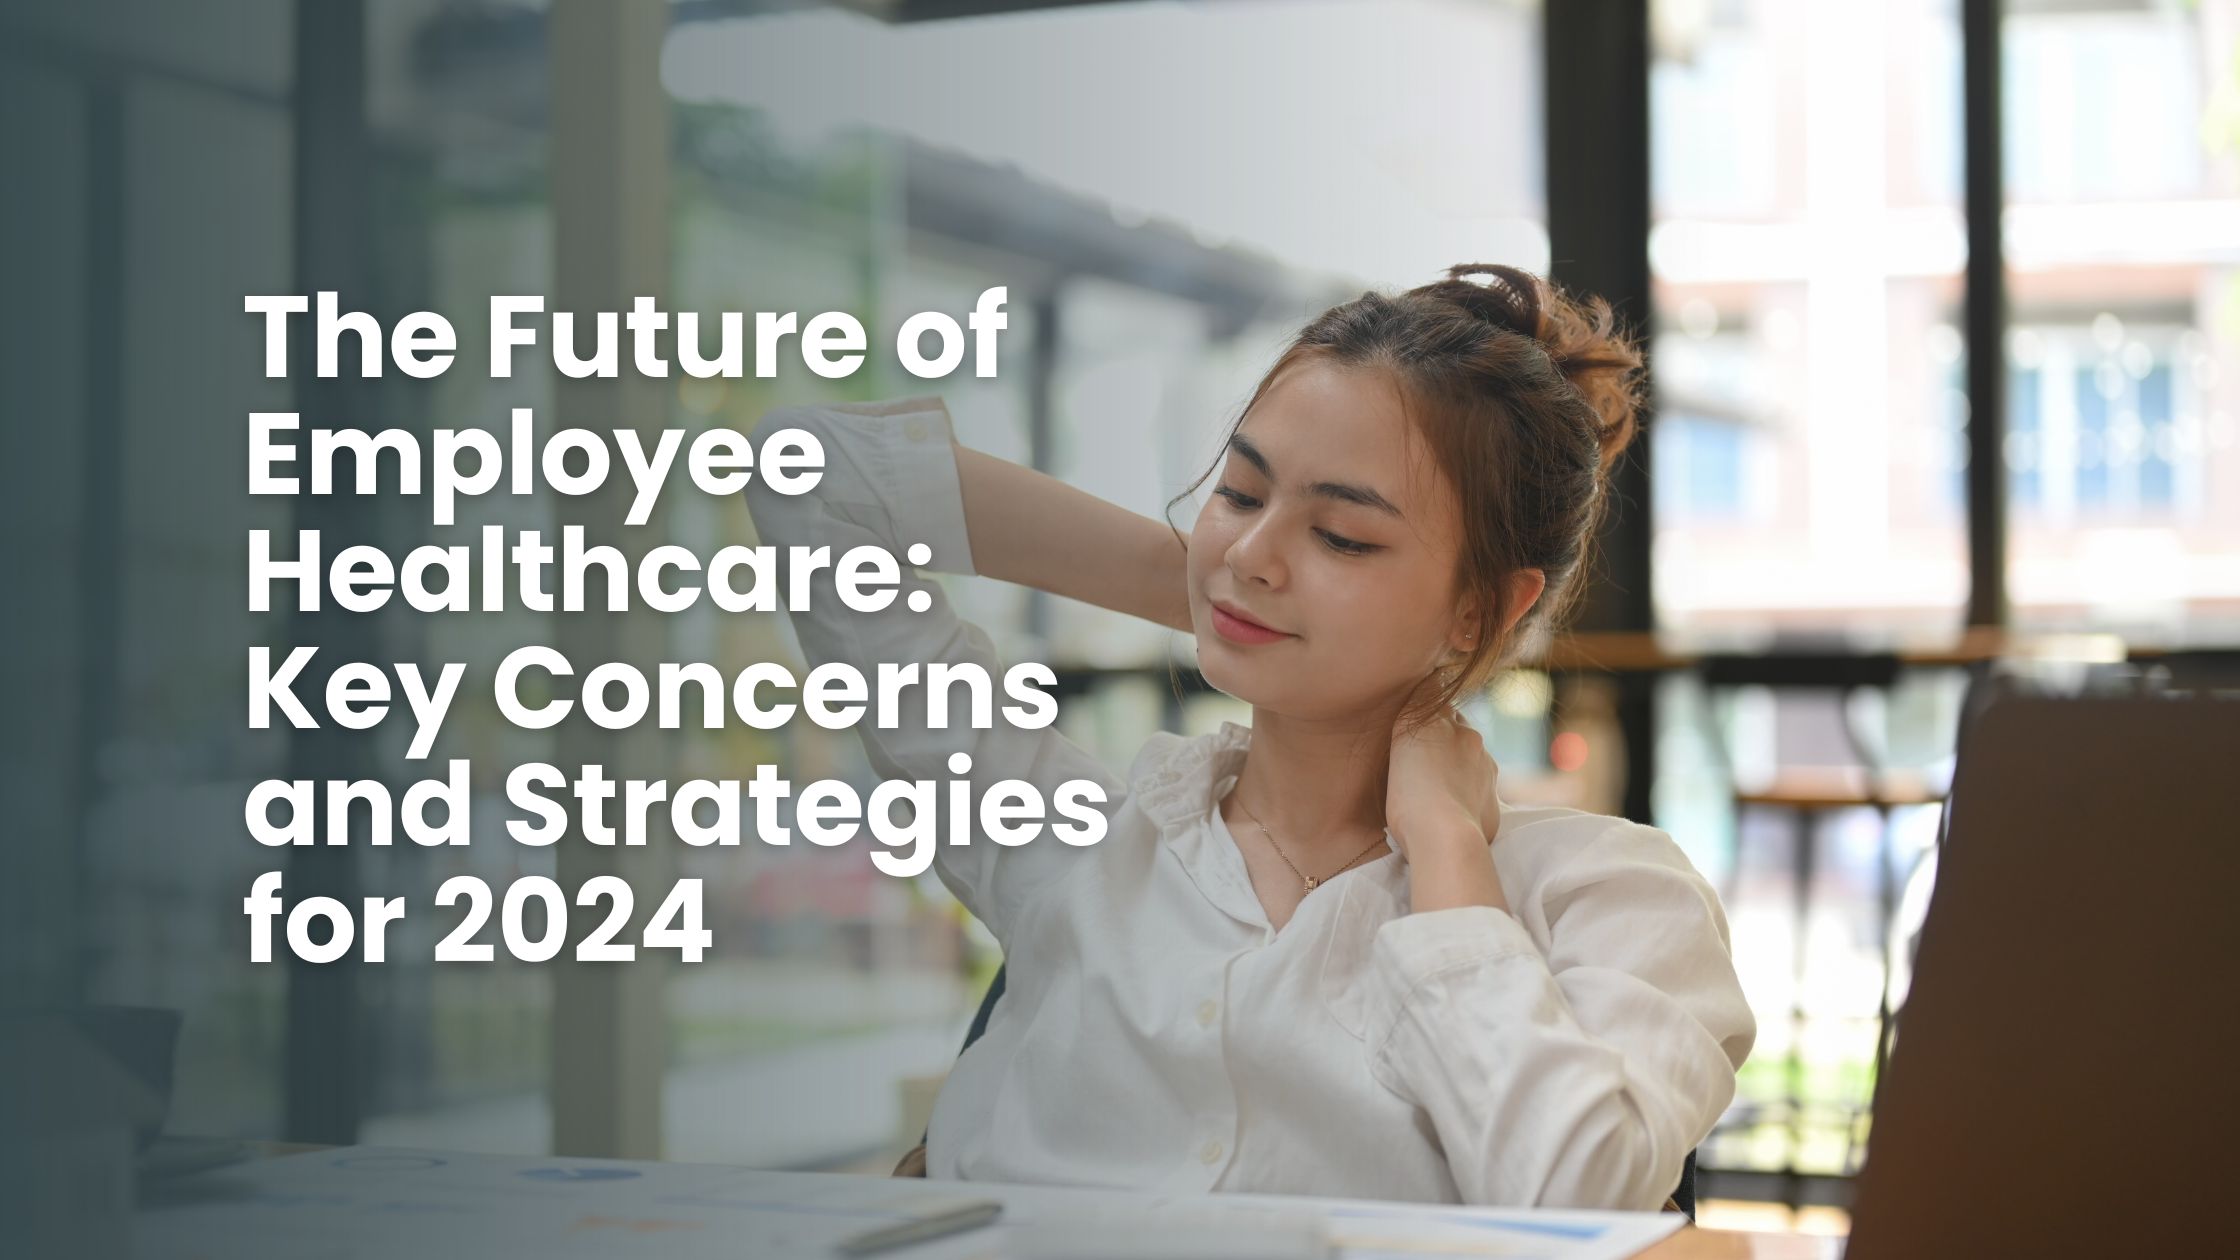 The Future of Employee Healthcare: Key Concerns and Strategies for 2024